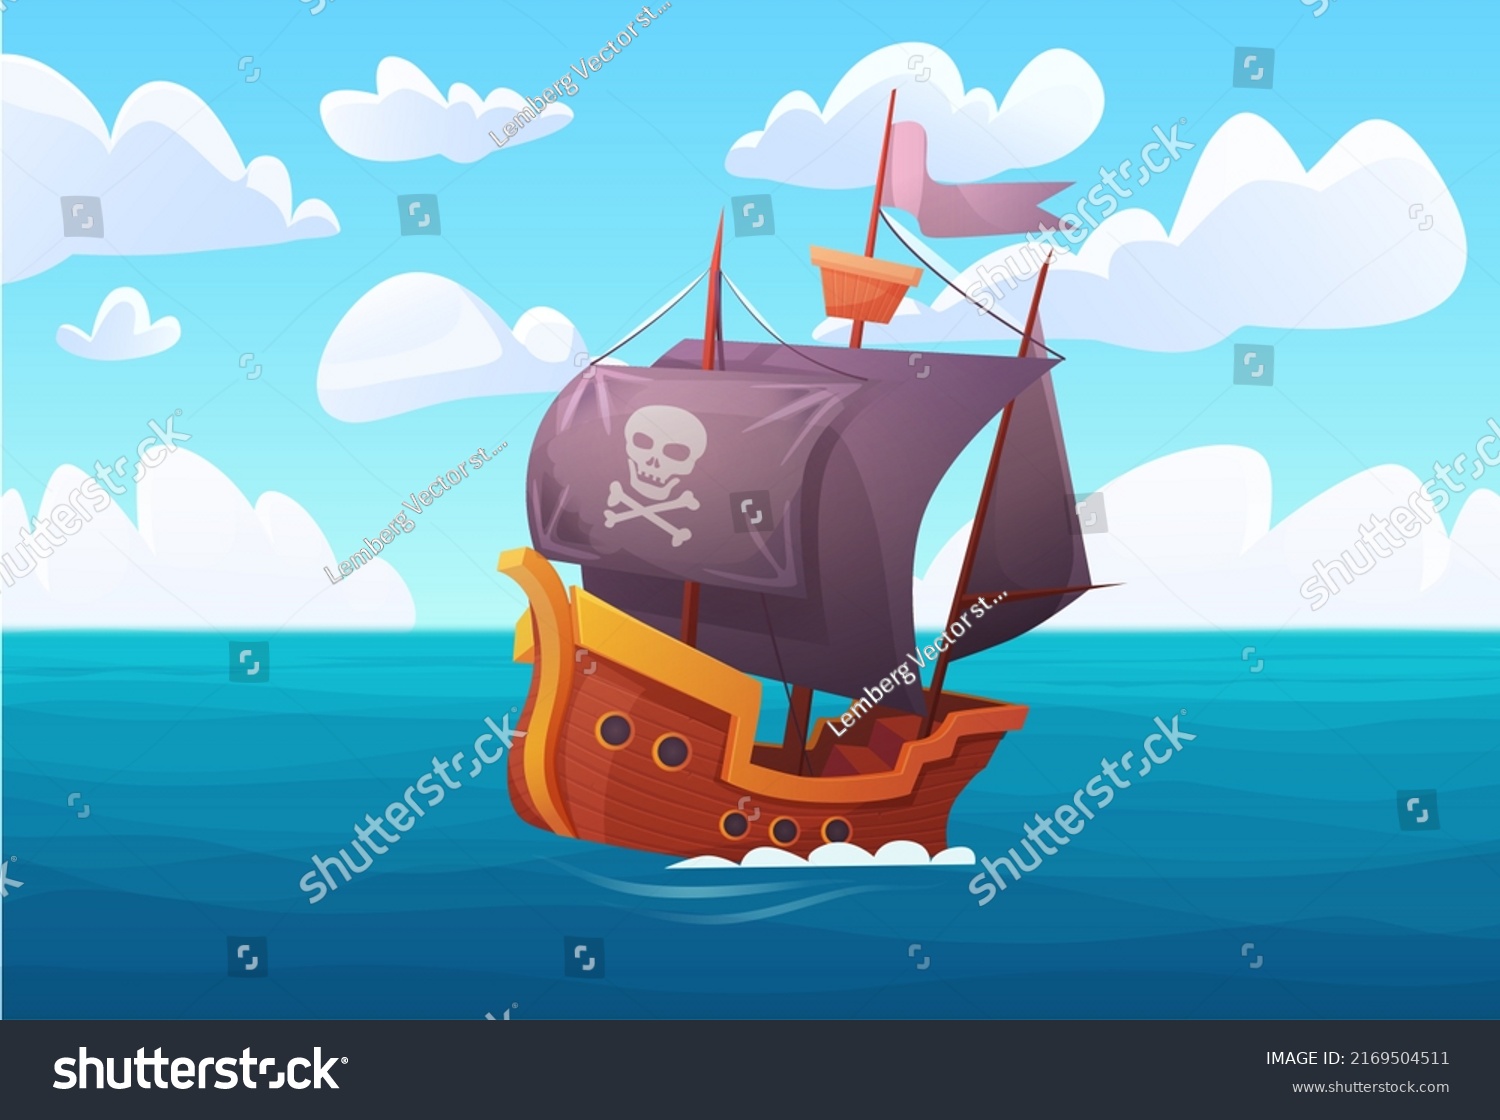 SVG of Fantasy adventure of wooden ship with pirate flag in sea harbor vector illustration. Cartoon sea landscape with buccaneers old galleon travel, search of golden treasure by corsairs background svg